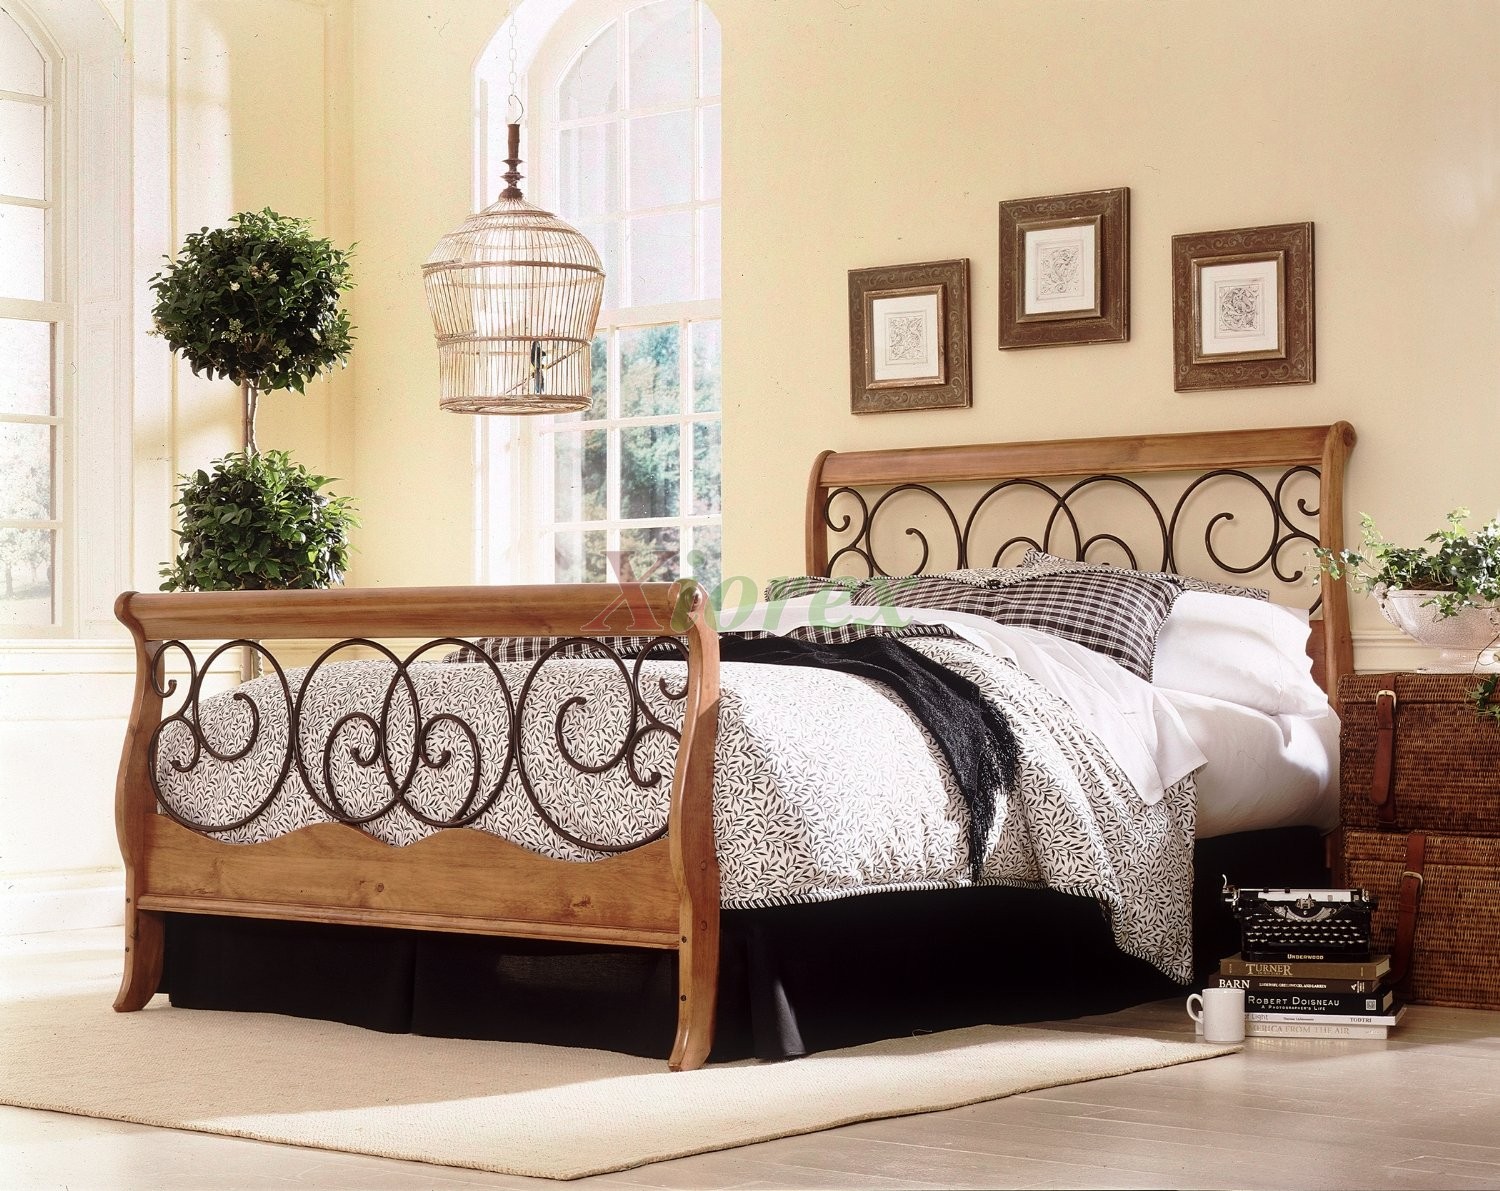 Dunhill Bed In Autumn Brown Honey Oak, Metal Sleigh Bed King Size